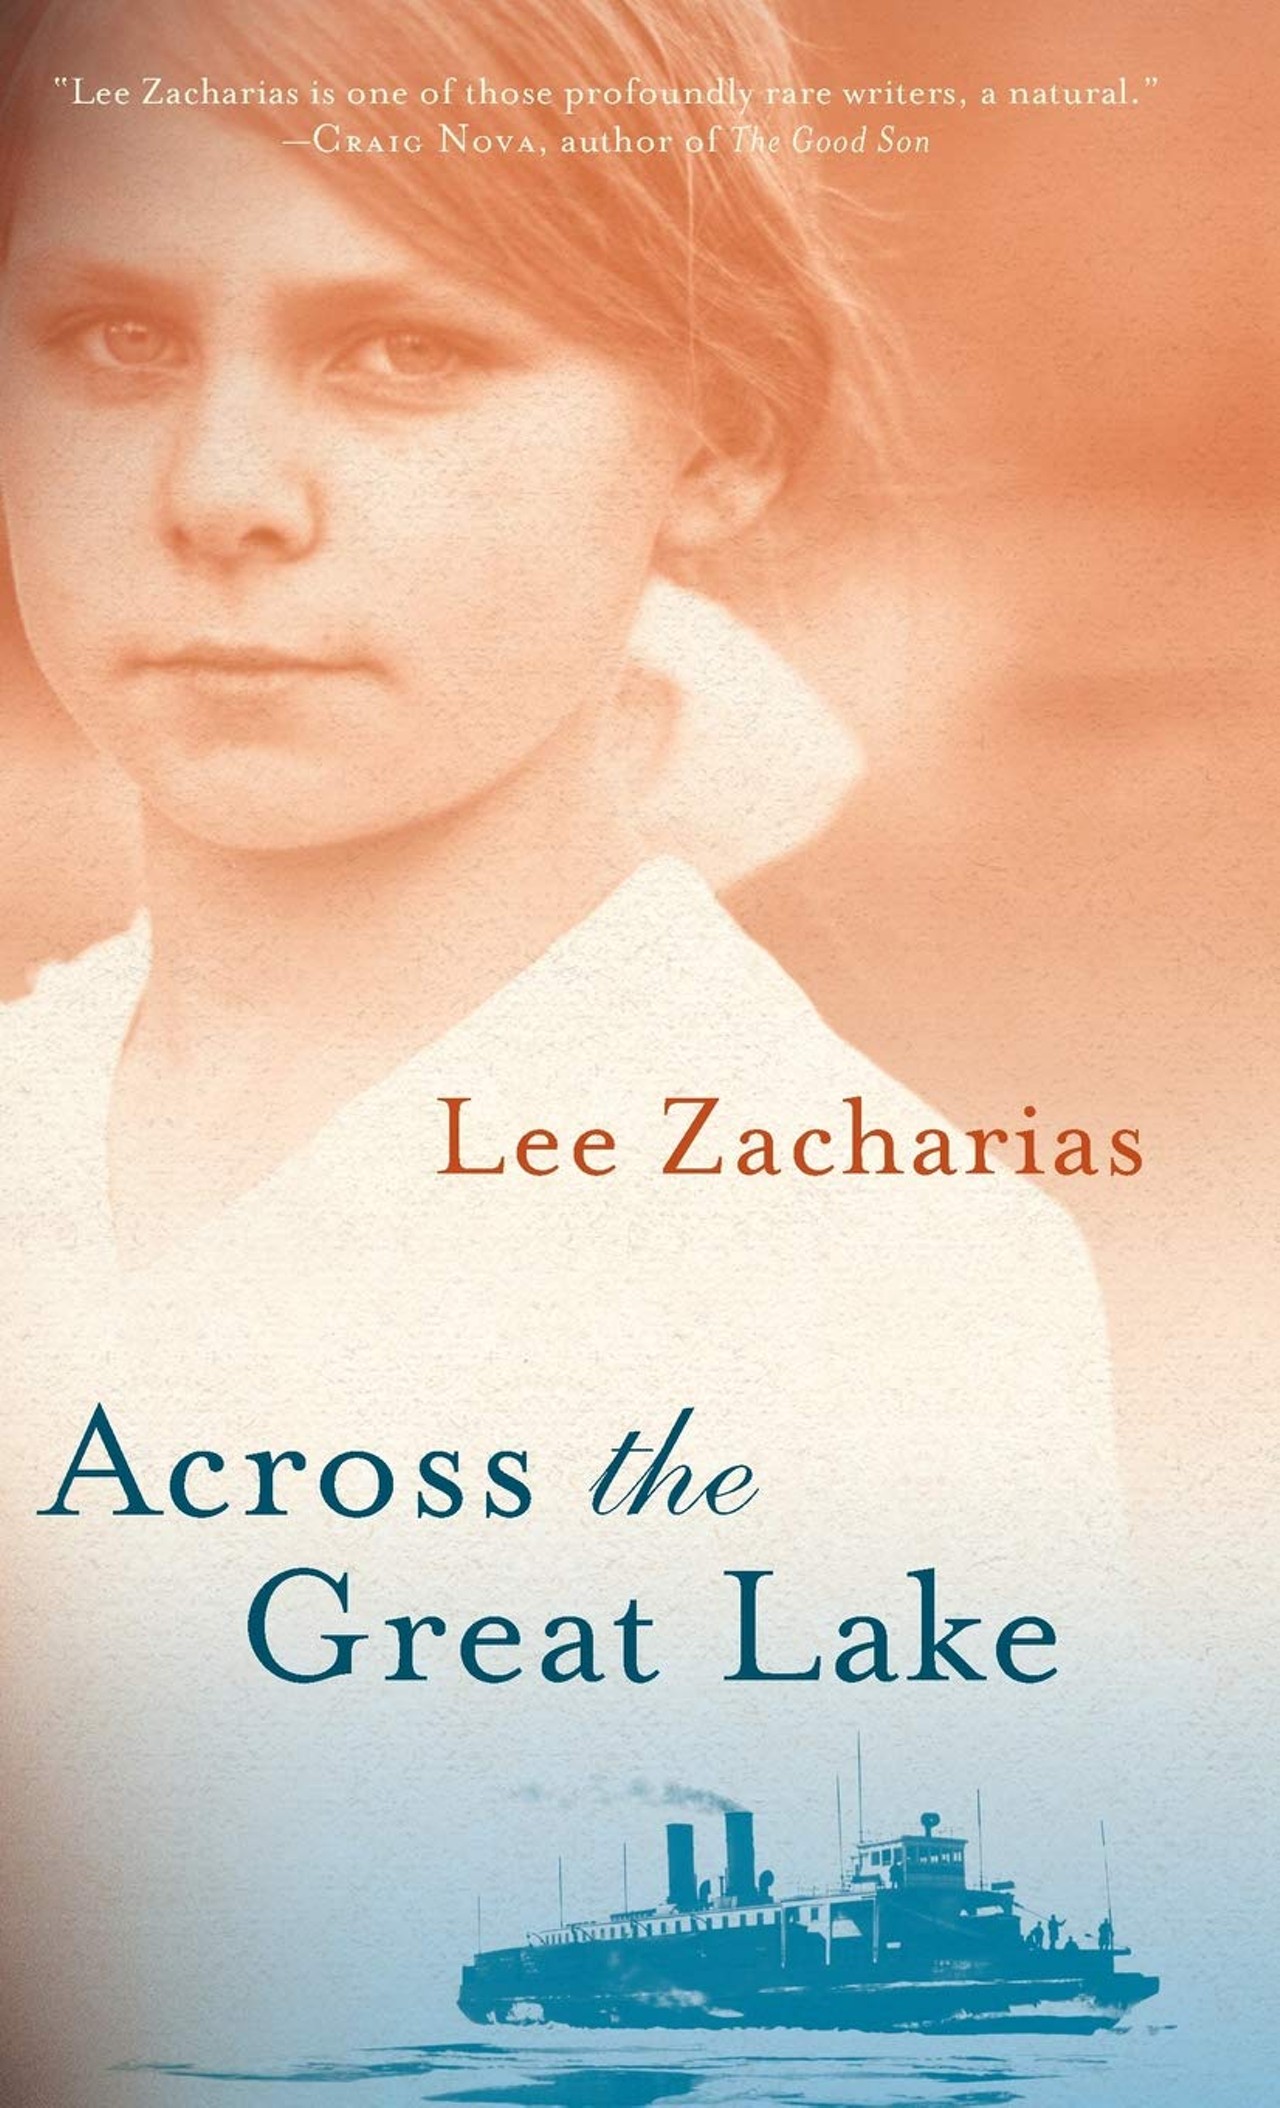 Across the Great Lake
One woman&#146;s past comes to the surface in this fiction novel set on Lake Michigan. Across the Great Lake, an Independent Publisher Book Award for Literary Fiction winner and 2019 Michigan Notable Book, is Fern Halvorson&#146;s retelling of a childhood journey across the lake and the secret about life and death she has kept since.